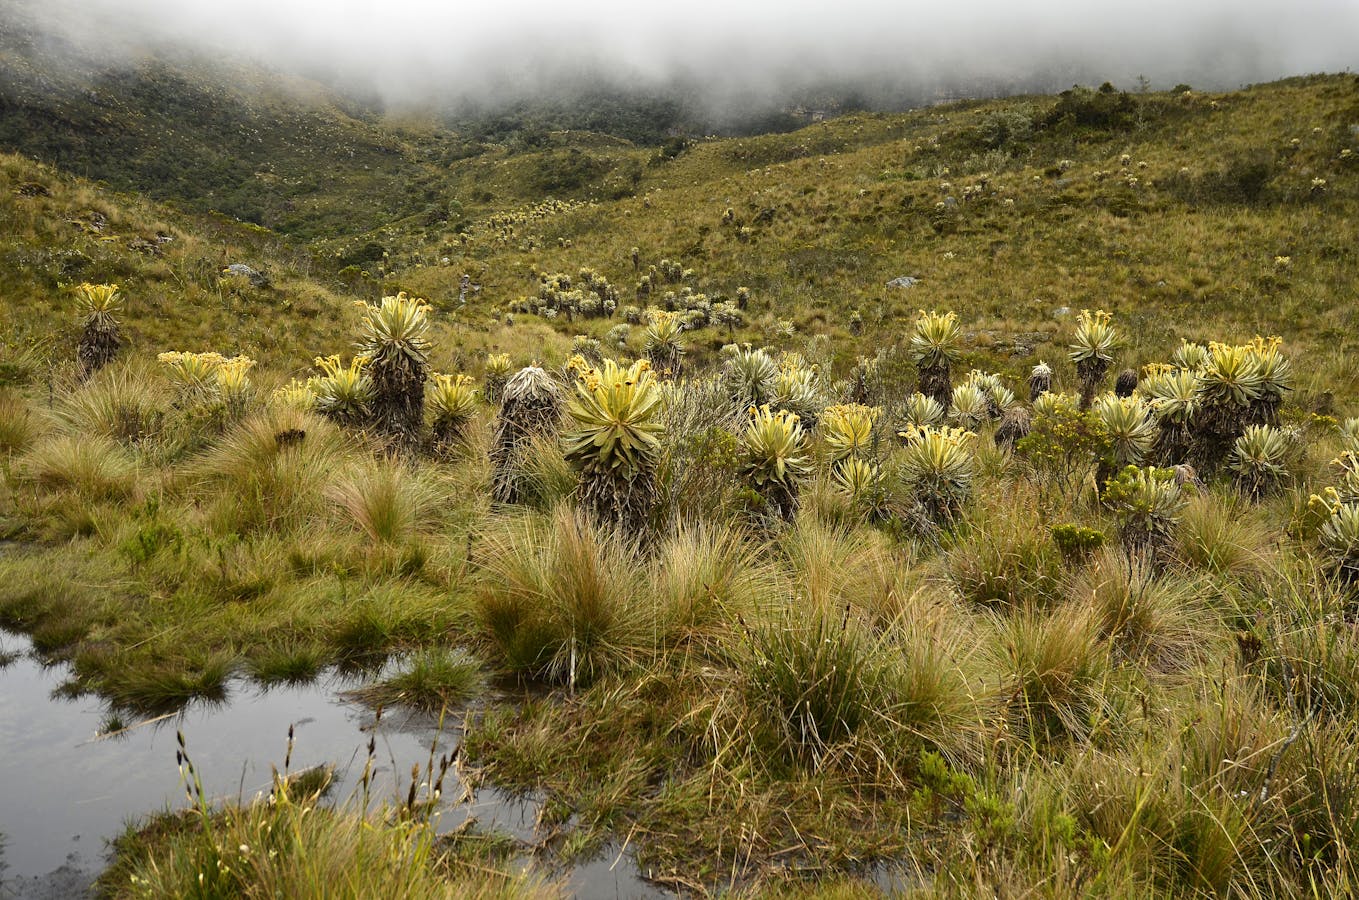 Much of South America's water originates in the high Andes. Paramo vegetation acts like a sponge to absorb water which is then delivered to people downstream.